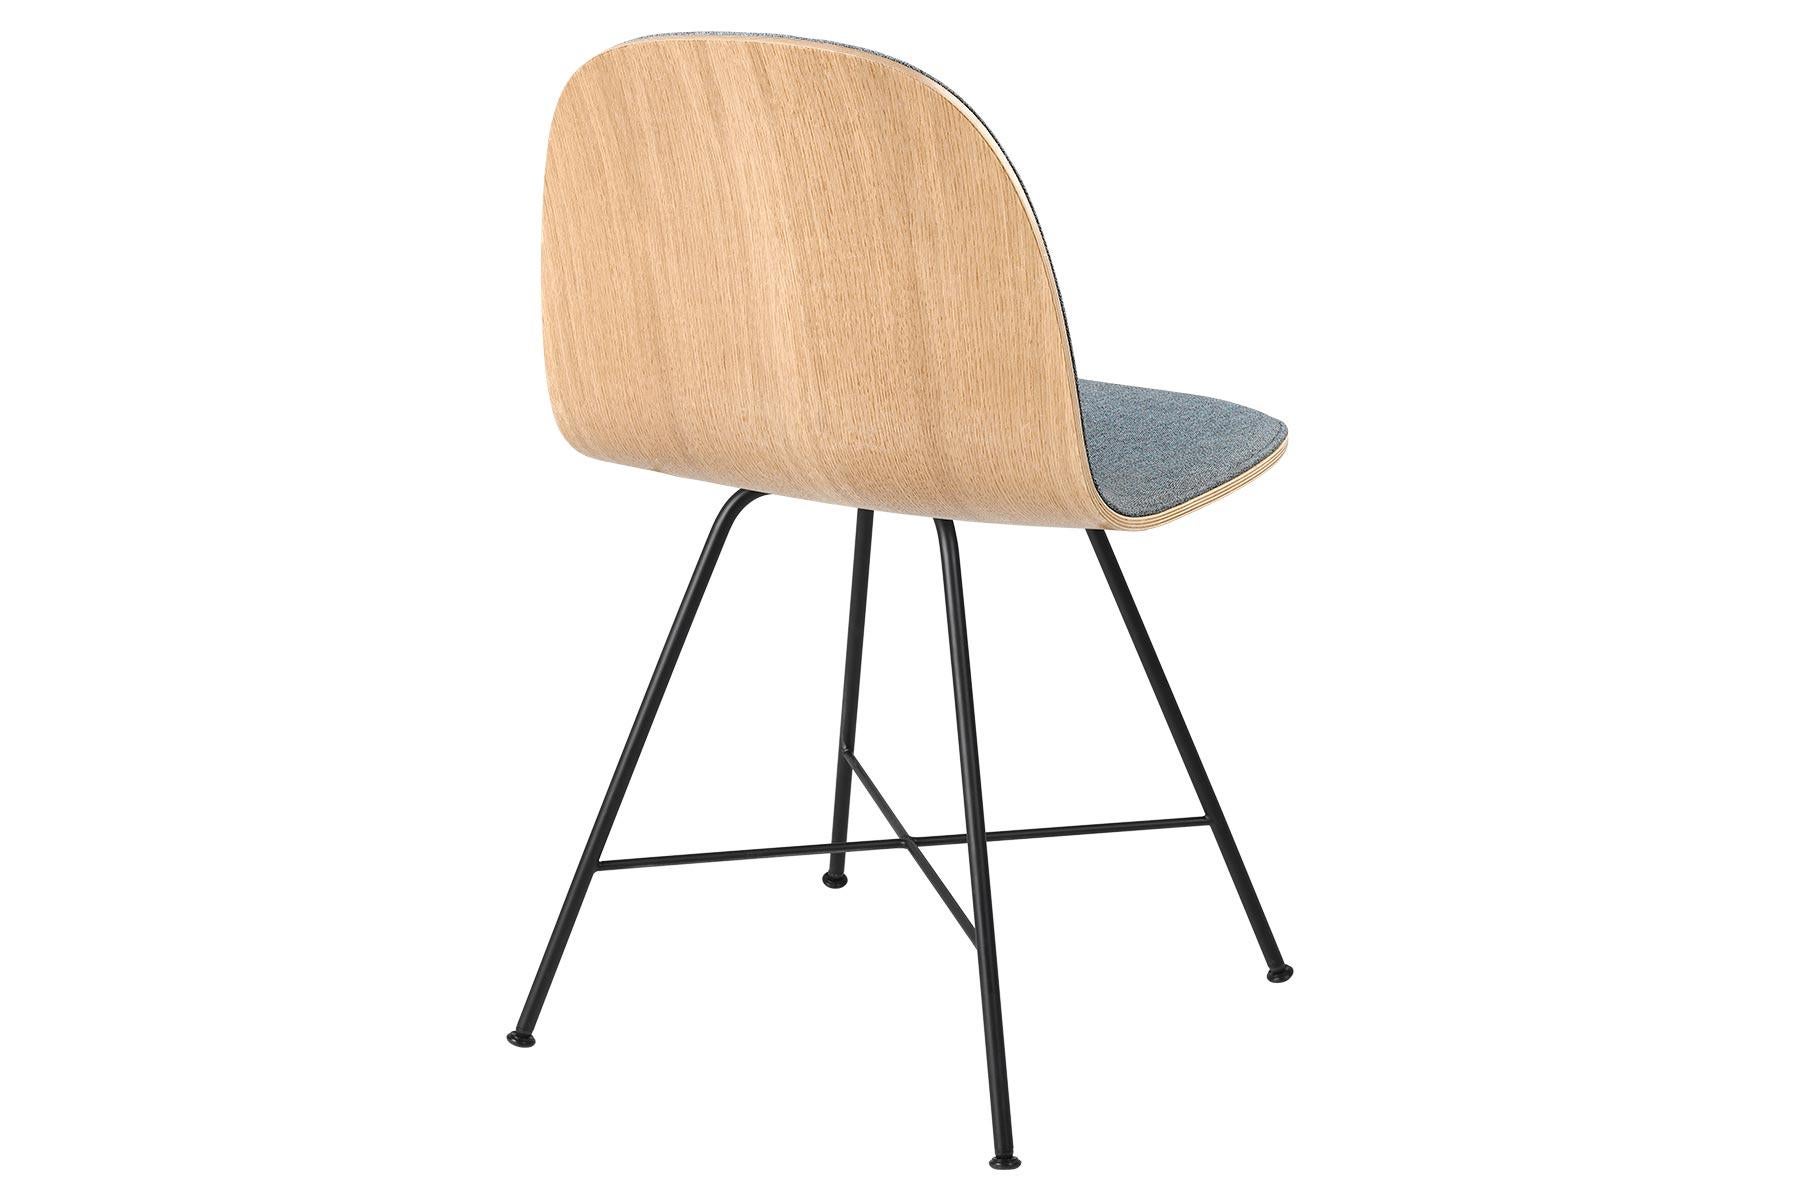 The GUBI 2D Chair is a series of light dining chairs made from laminated veneer with options for front upholstery in a wide range of fabrics and leathers, suitable for both private and public spaces. Being an extension to the classic GUBI 3D Chair,